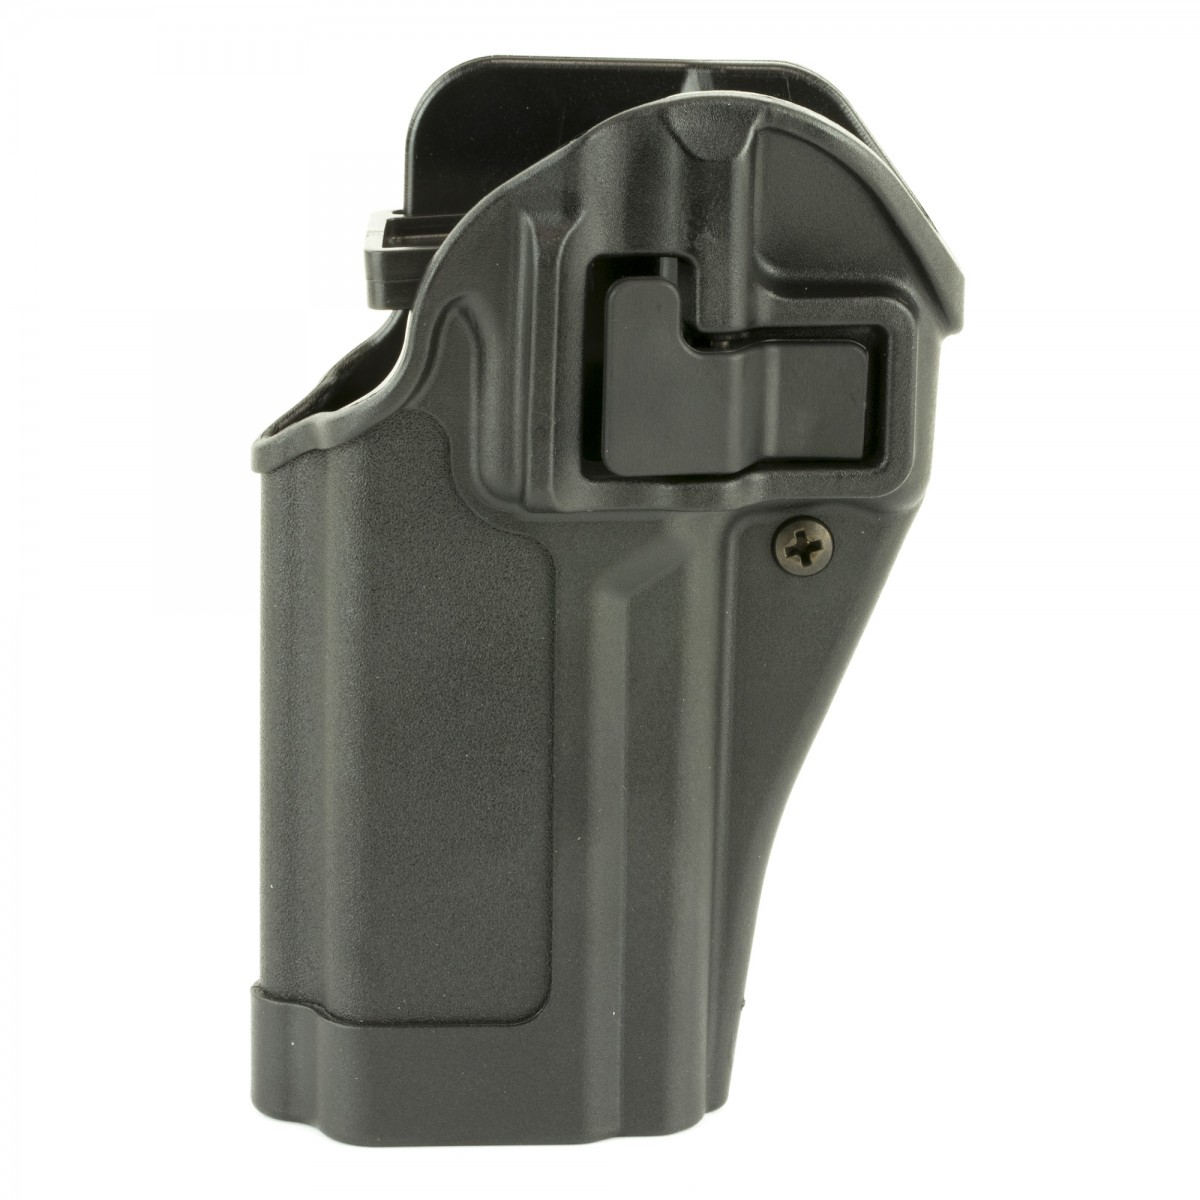 Blackhawk CQC Serpa Holster for Sig Sauer P250/P320 Full-Size and 